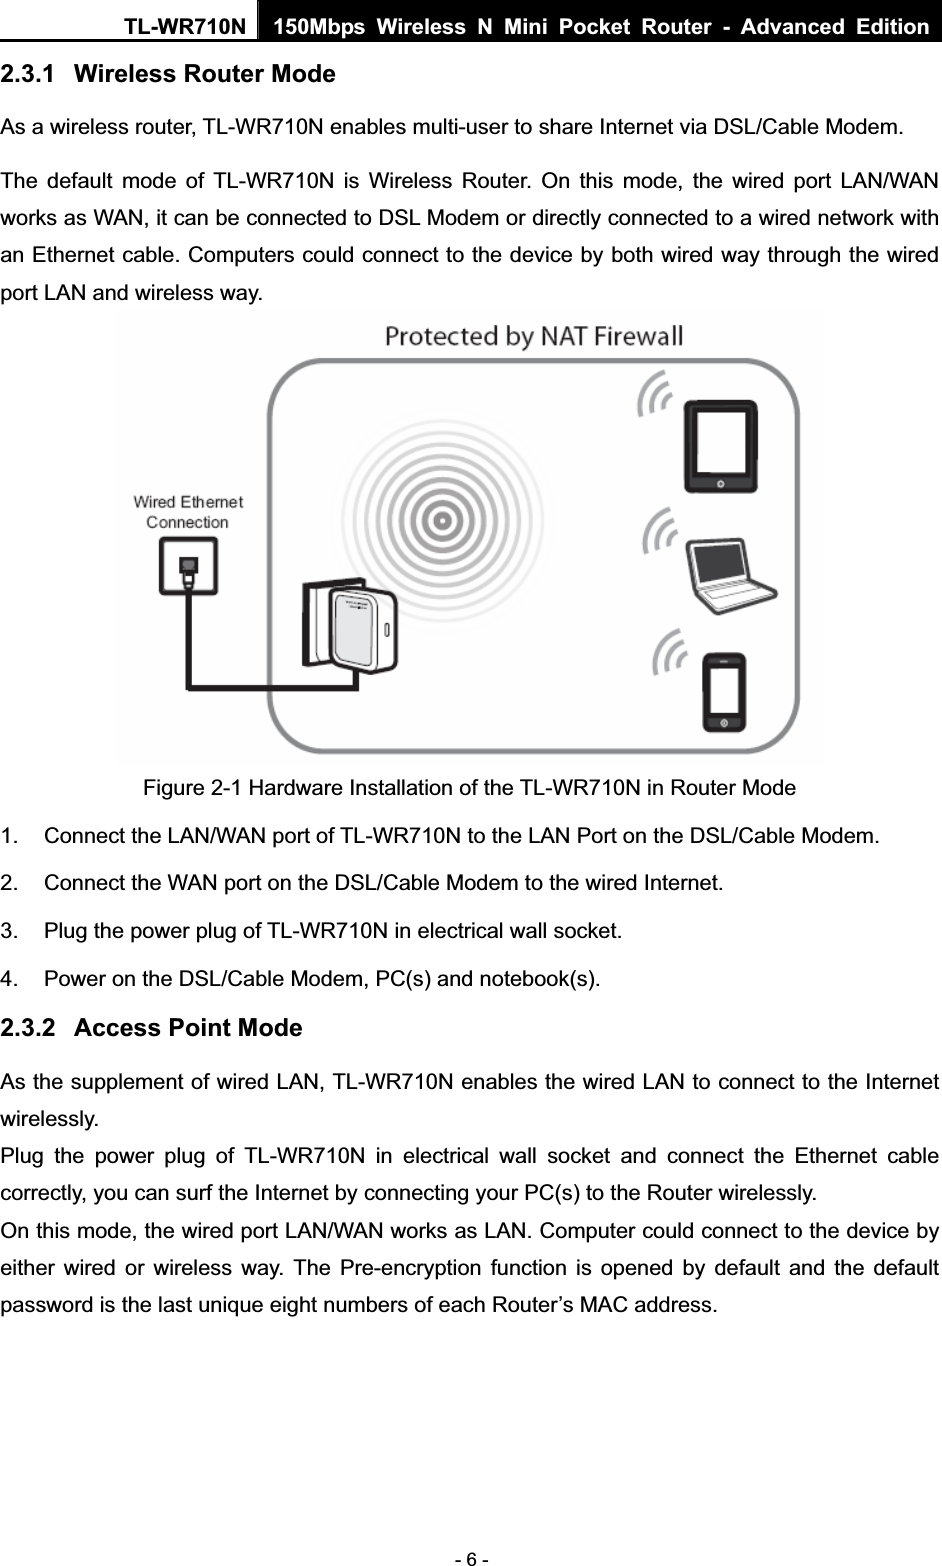 TL-WR710N  150Mbps Wireless N Mini Pocket Router - Advanced Edition- 6 - 2.3.1 Wireless Router Mode As a wireless router, TL-WR710N enables multi-user to share Internet via DSL/Cable Modem. The default mode of TL-WR710N is Wireless Router. On this mode, the wired port LAN/WAN works as WAN, it can be connected to DSL Modem or directly connected to a wired network with an Ethernet cable. Computers could connect to the device by both wired way through the wired port LAN and wireless way. Figure 2-1 Hardware Installation of the TL-WR710N in Router Mode 1.  Connect the LAN/WAN port of TL-WR710N to the LAN Port on the DSL/Cable Modem. 2.  Connect the WAN port on the DSL/Cable Modem to the wired Internet. 3.  Plug the power plug of TL-WR710N in electrical wall socket. 4.  Power on the DSL/Cable Modem, PC(s) and notebook(s). 2.3.2 Access Point Mode As the supplement of wired LAN, TL-WR710N enables the wired LAN to connect to the Internet wirelessly. Plug the power plug of TL-WR710N in electrical wall socket and connect the Ethernet cable correctly, you can surf the Internet by connecting your PC(s) to the Router wirelessly. On this mode, the wired port LAN/WAN works as LAN. Computer could connect to the device by either wired or wireless way. The Pre-encryption function is opened by default and the default password is the last unique eight numbers of each Router’s MAC address. 